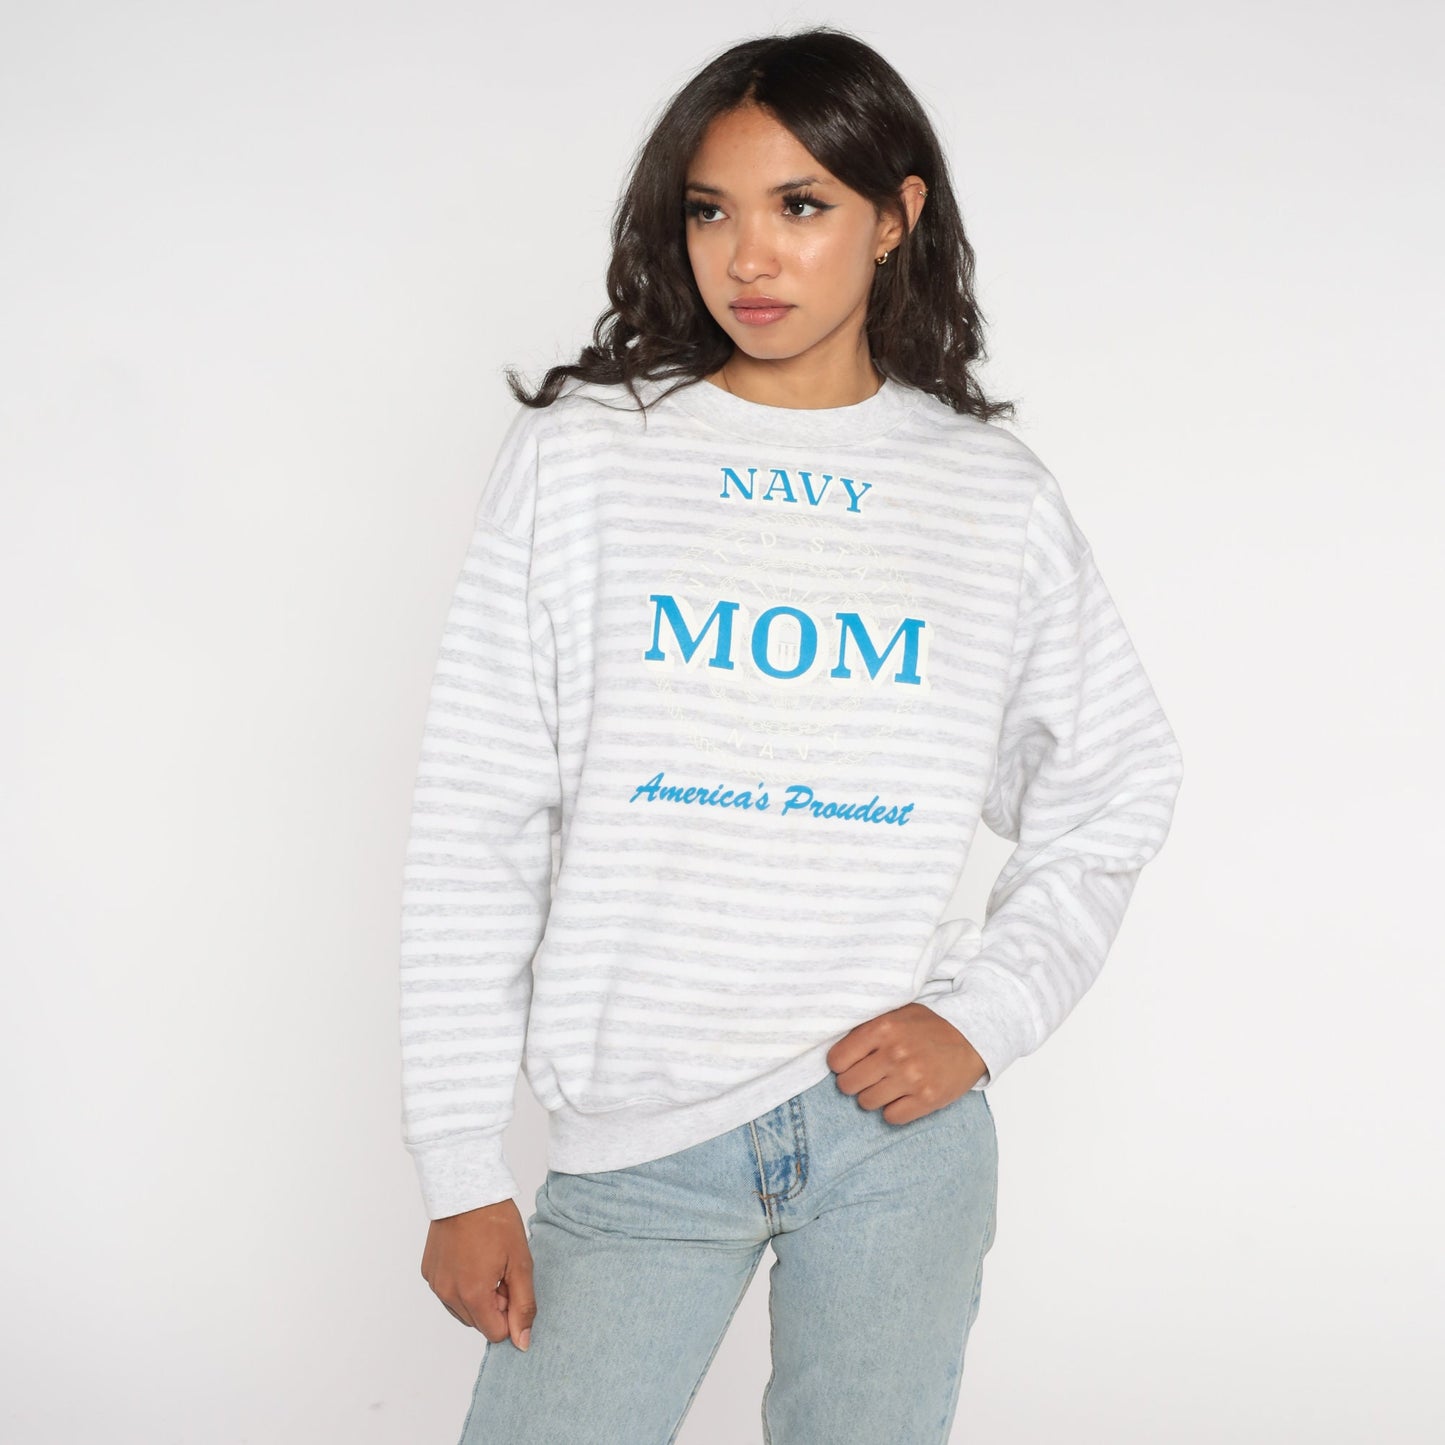 Navy Mom Sweatshirt 90s Americas Proudest Shirt US Parent Armed Forces USA Striped Crewneck Gift Top Pullover Grey White Vintage 1990s Large